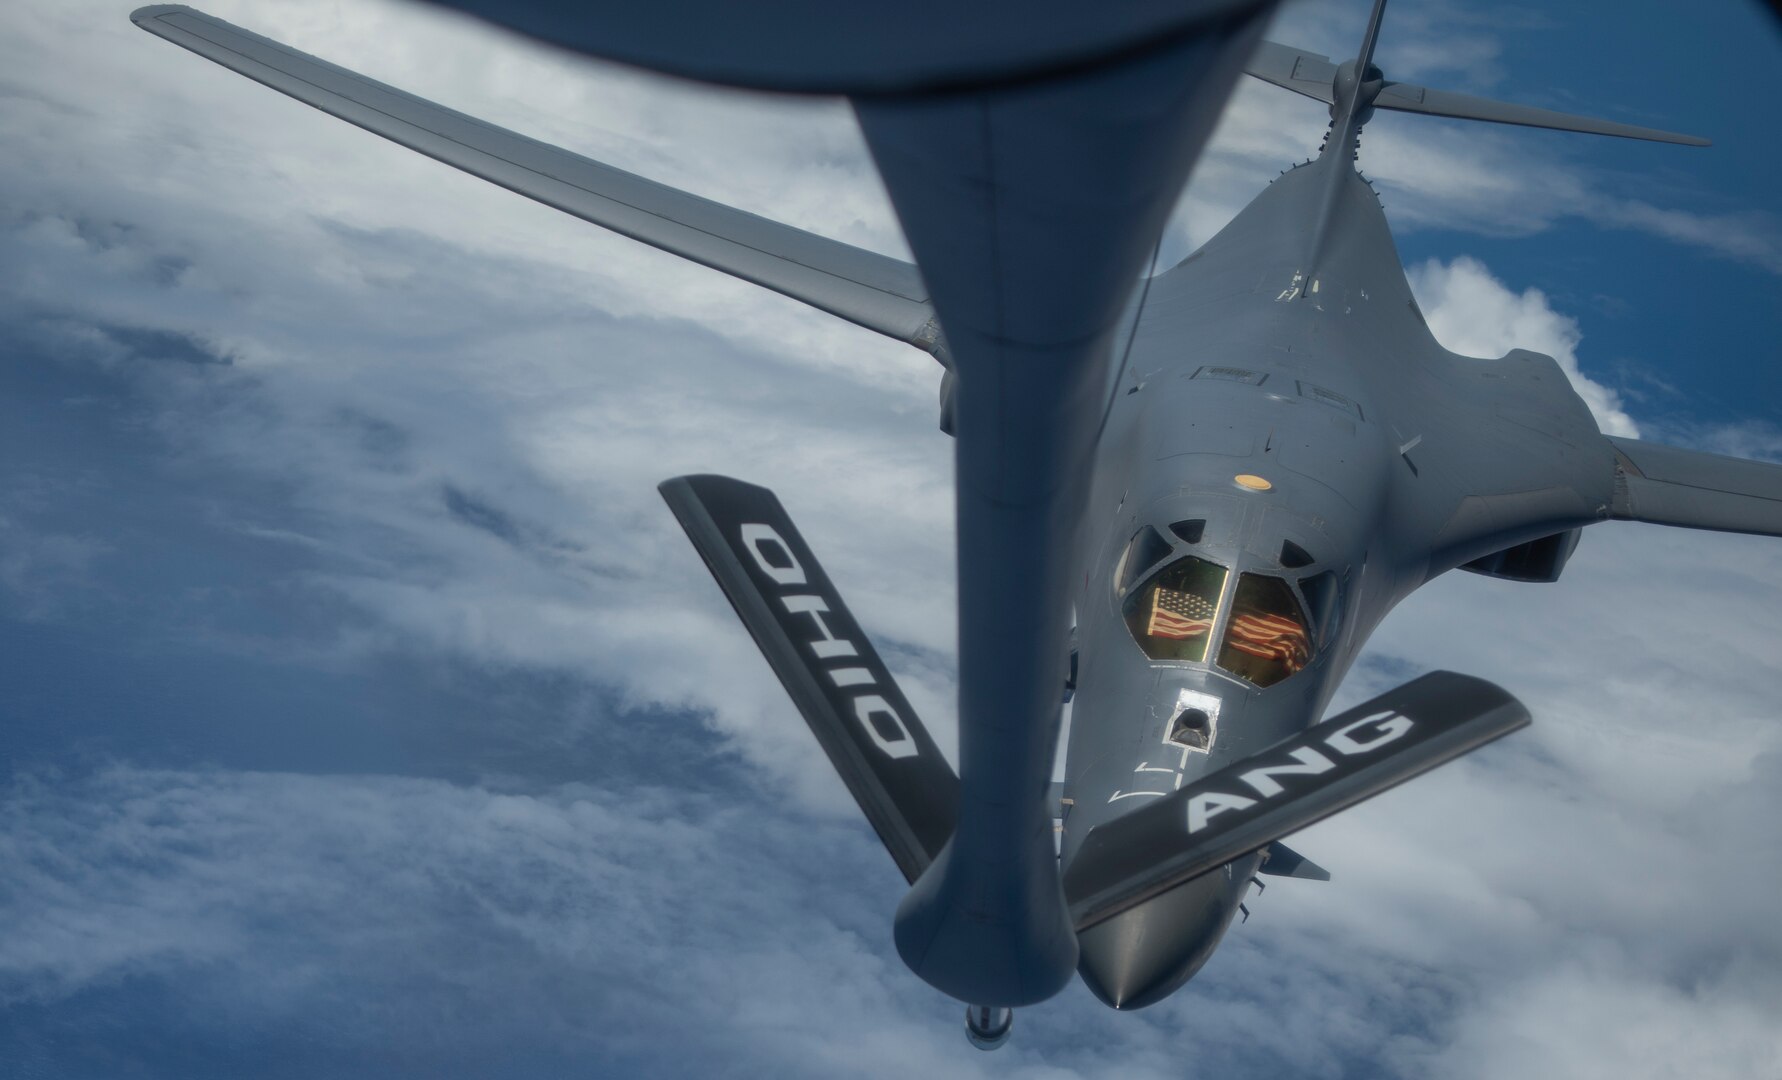 A 9th Expeditionary Bomb Squadron B-1B Lancer is refueled by an Ohio Air National Guard KC-135 Stratotanker from the 166th Aerial Refueling Squadron over the East China Sea May 6, 2020, during a training mission. The 9th EBS is deployed to Andersen Air Force Base, Guam, as part of a Bomber Task Force supporting Pacific Air Forces’ strategic deterrence missions and  commitment to the security and stability of the Indo-Pacific region. (U.S. Air Force photo by Senior Airman River Bruce)